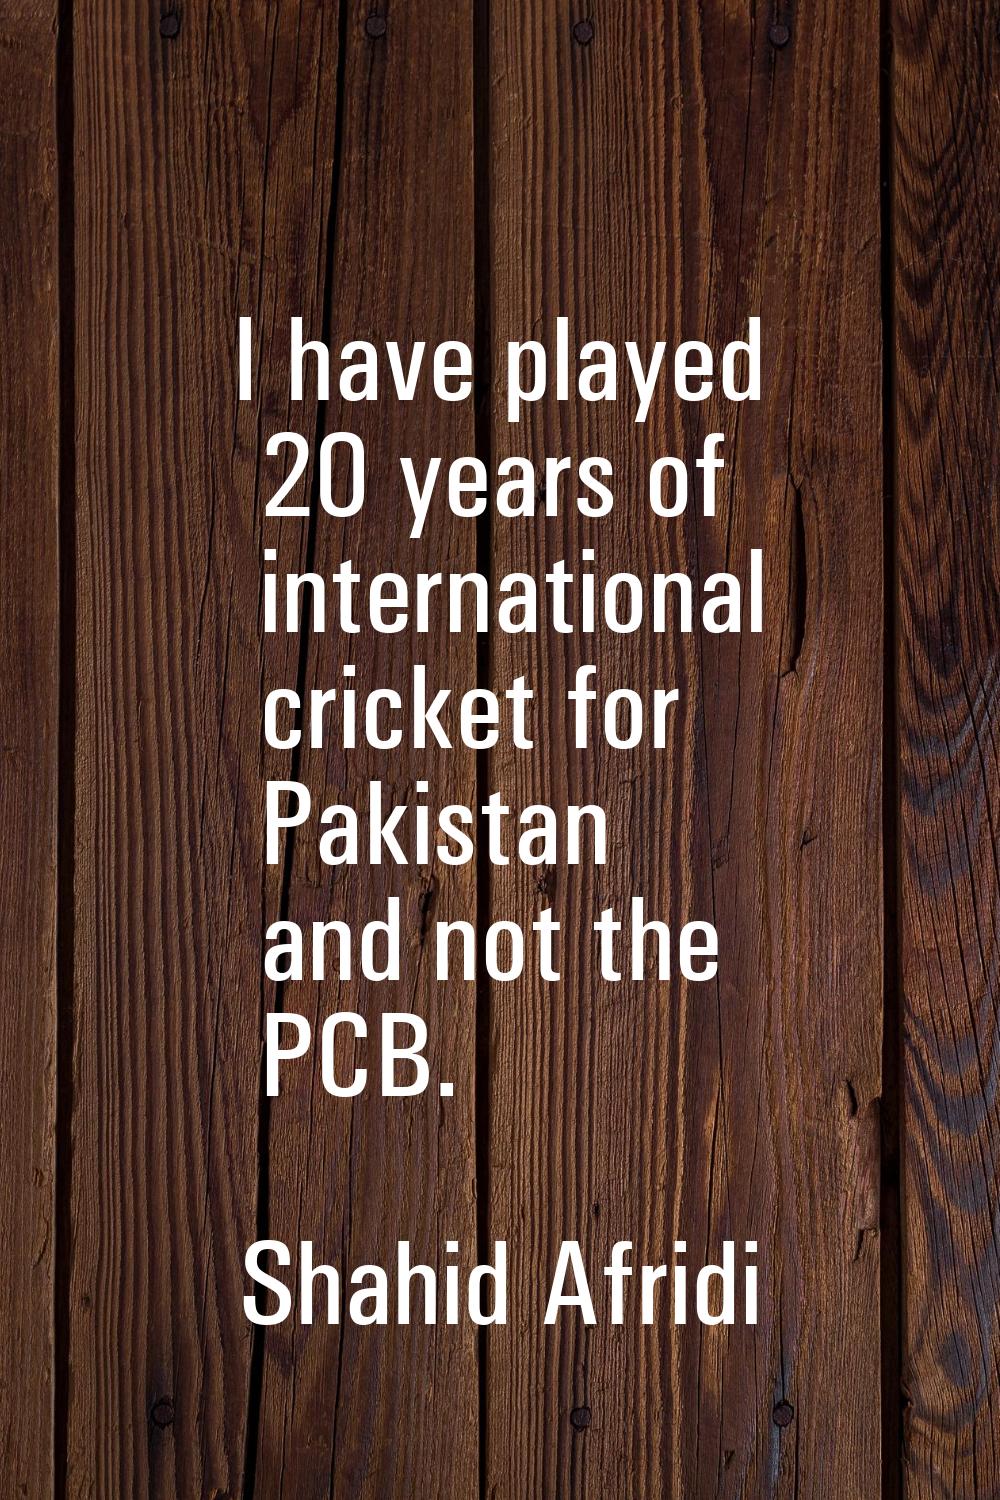 I have played 20 years of international cricket for Pakistan and not the PCB.